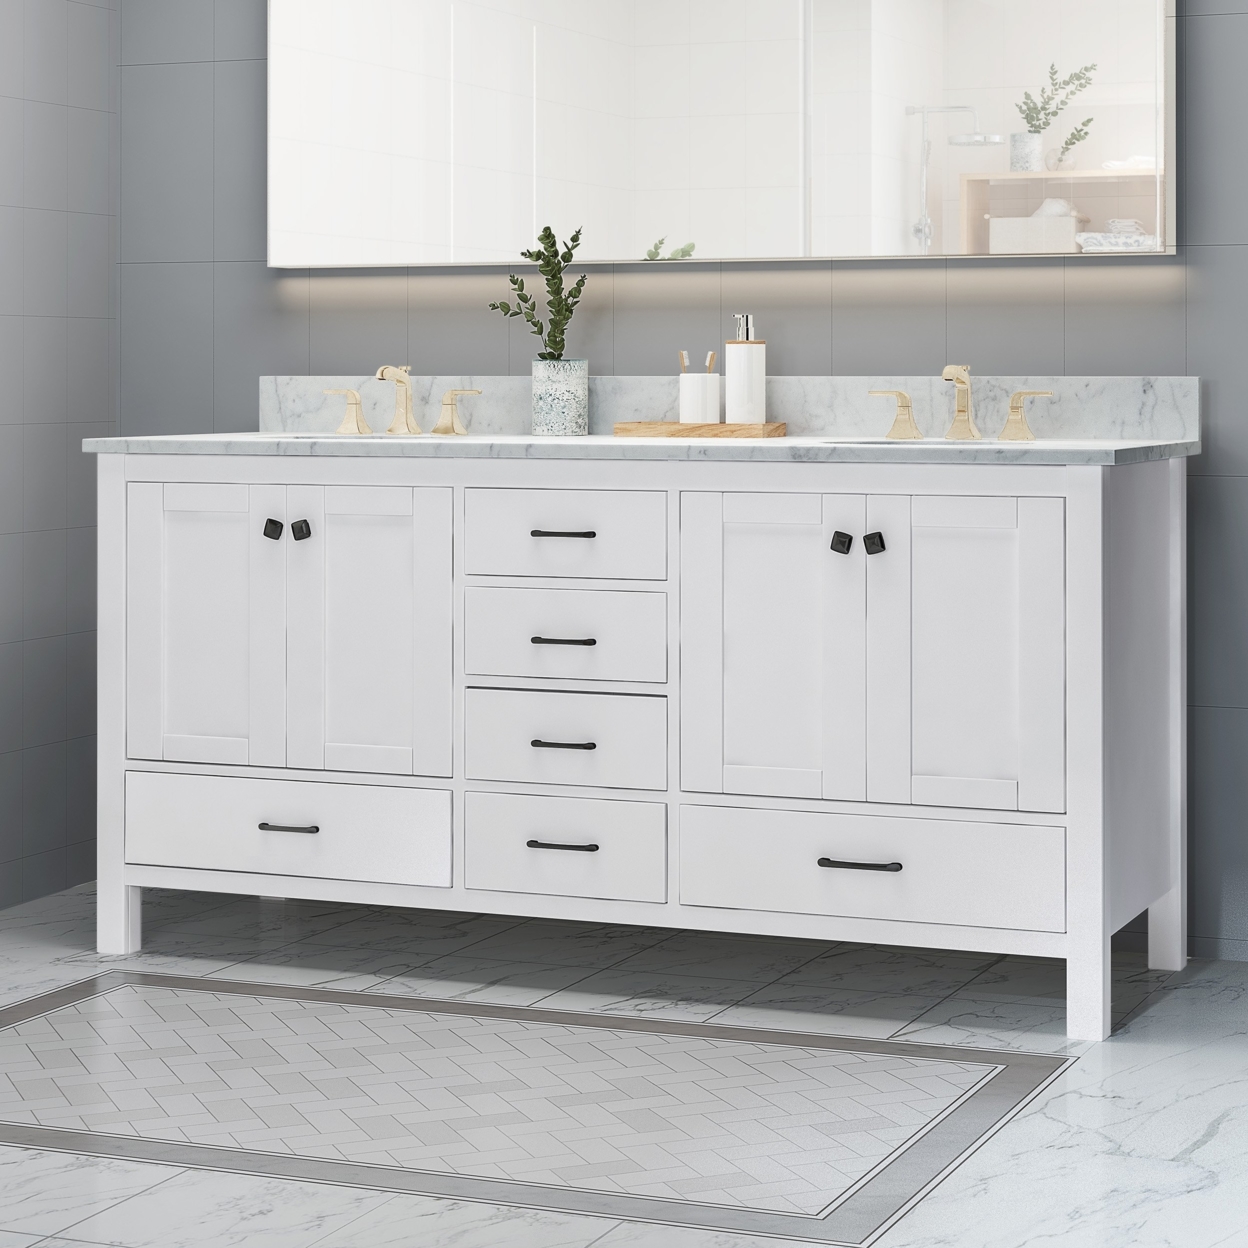 Laranne Contemporary 72 Wood Double Sink Bathroom Vanity With Marble Counter Top With Carrara White Marble - Gray